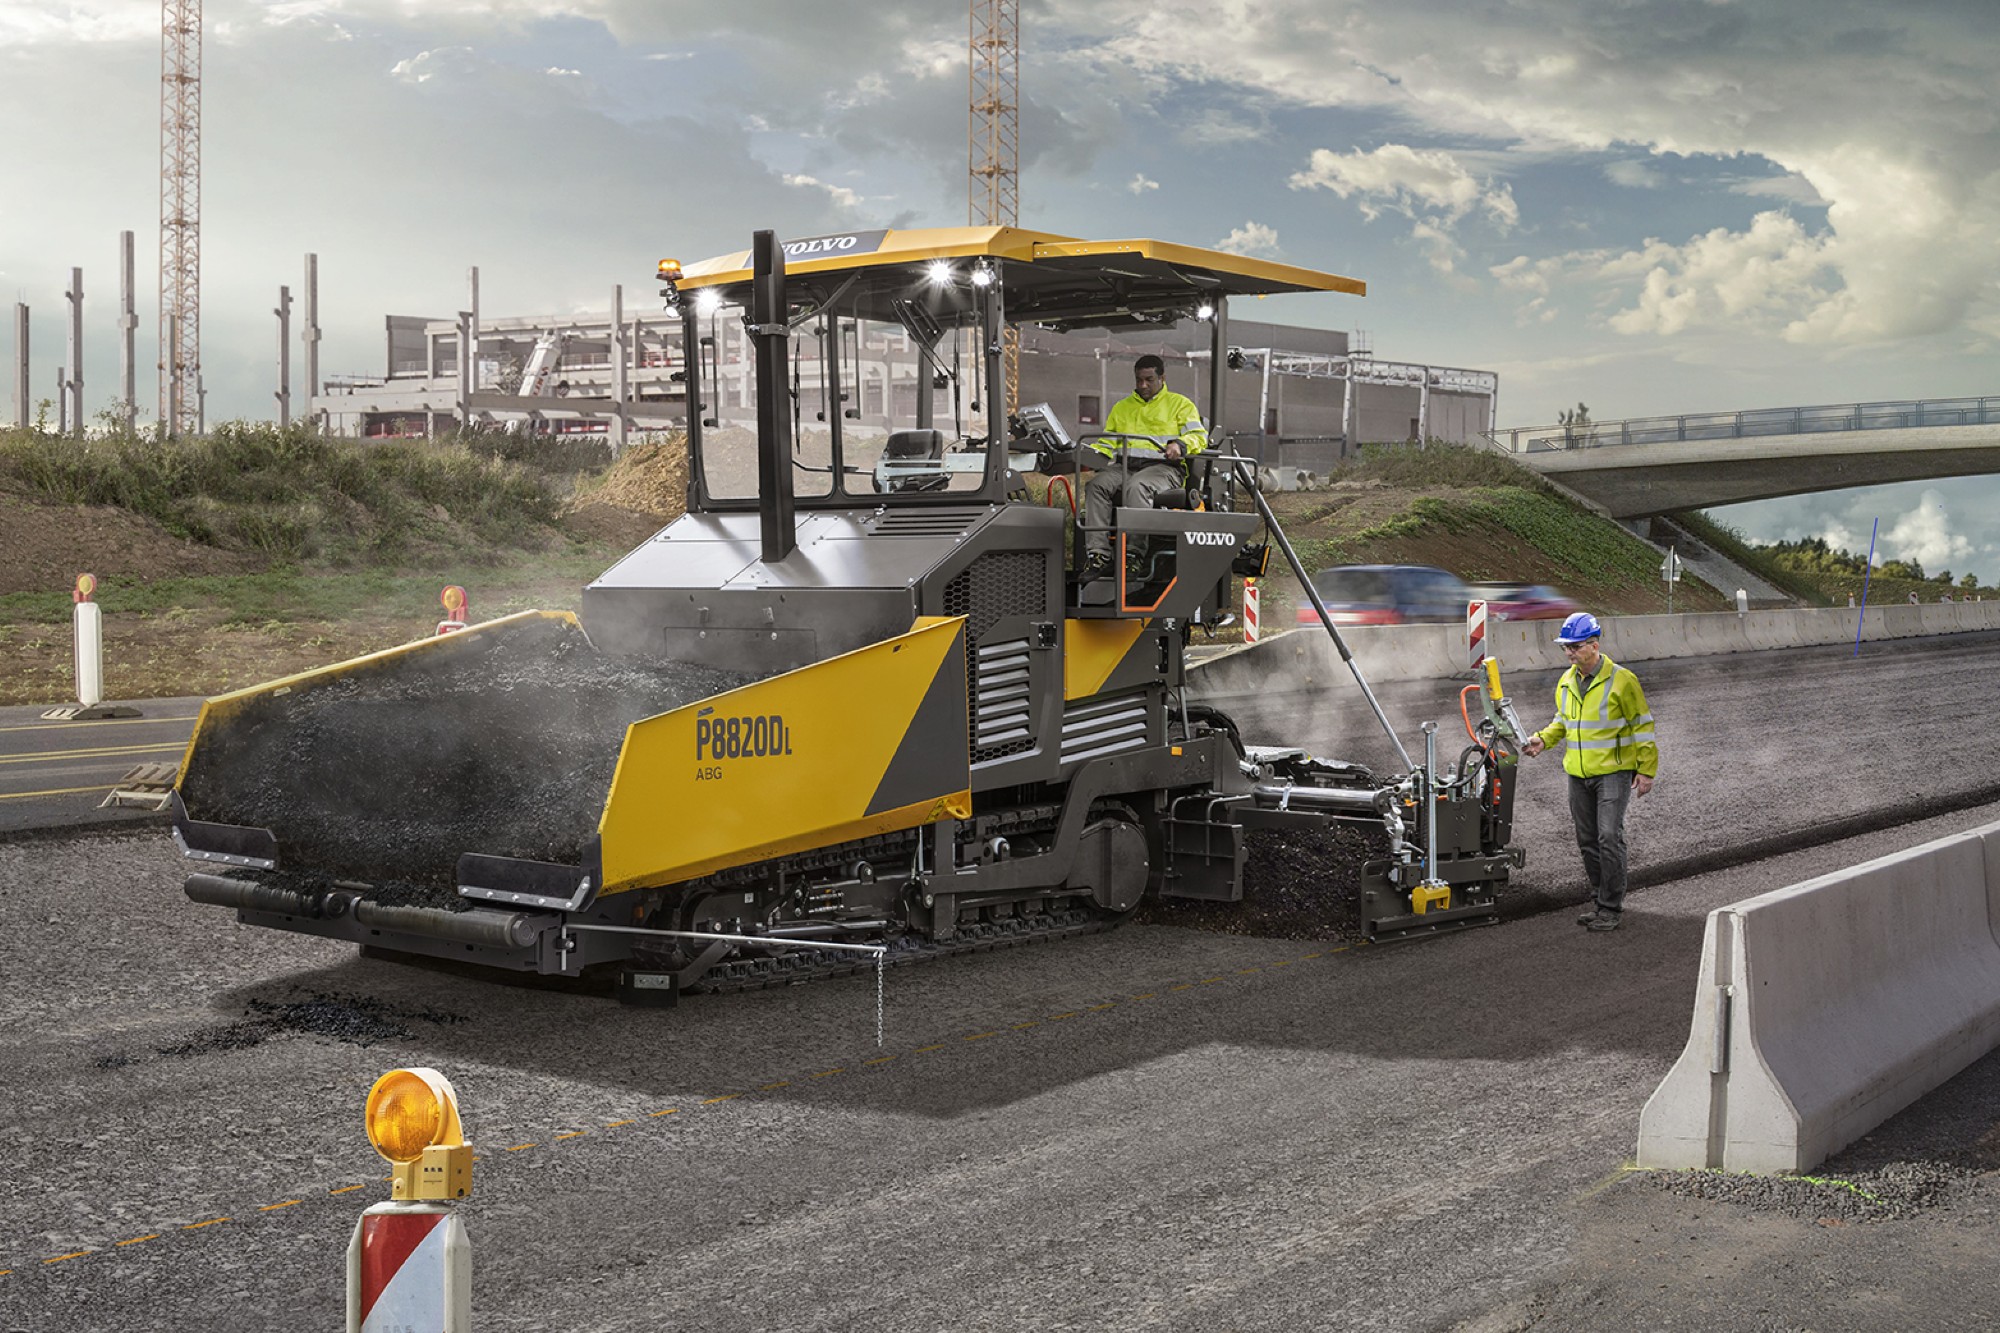 Ammann collabs with Volvo Ce for ABG Paver business